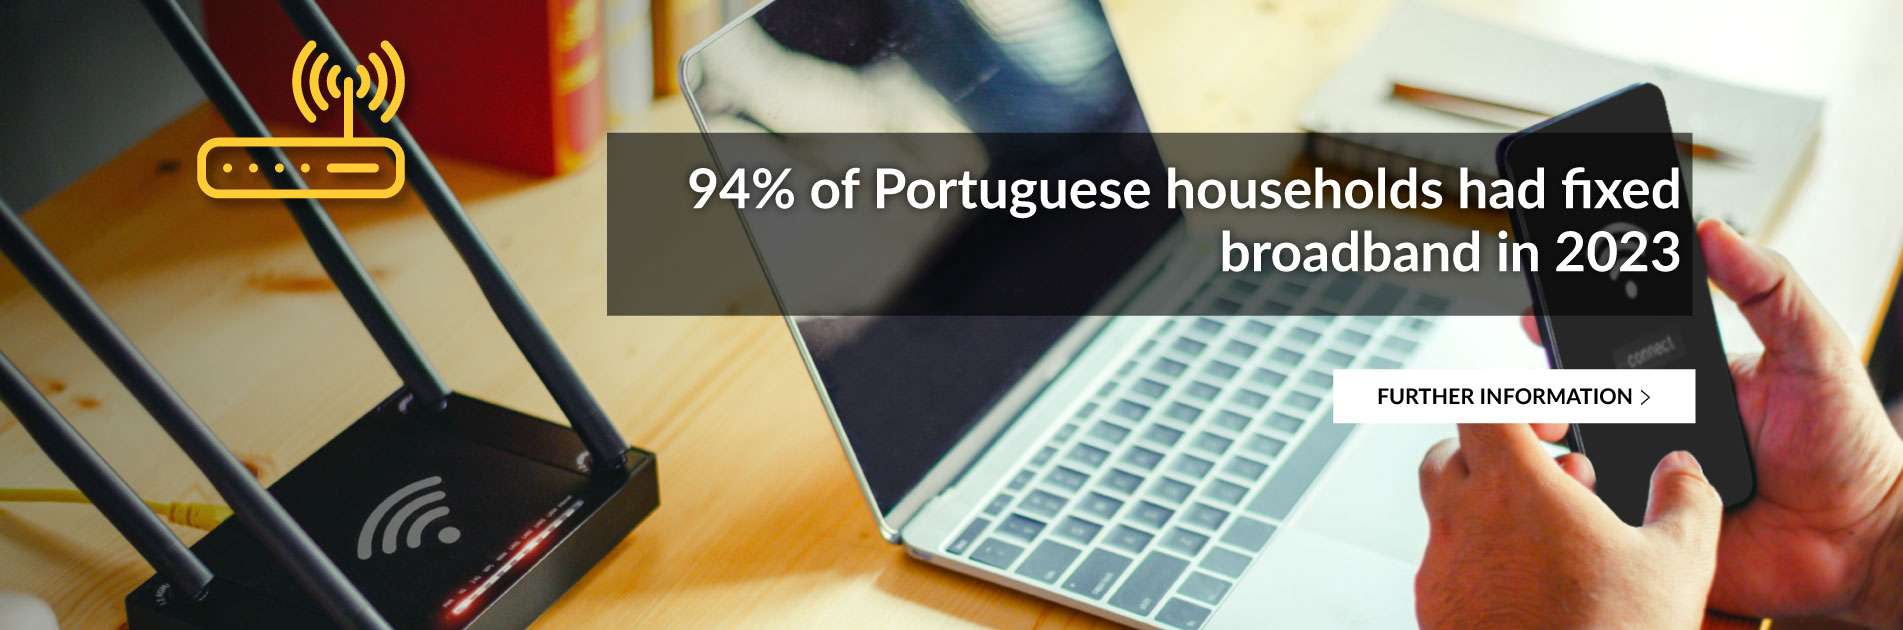 94% of Portuguese households had fixed broadband in 2023